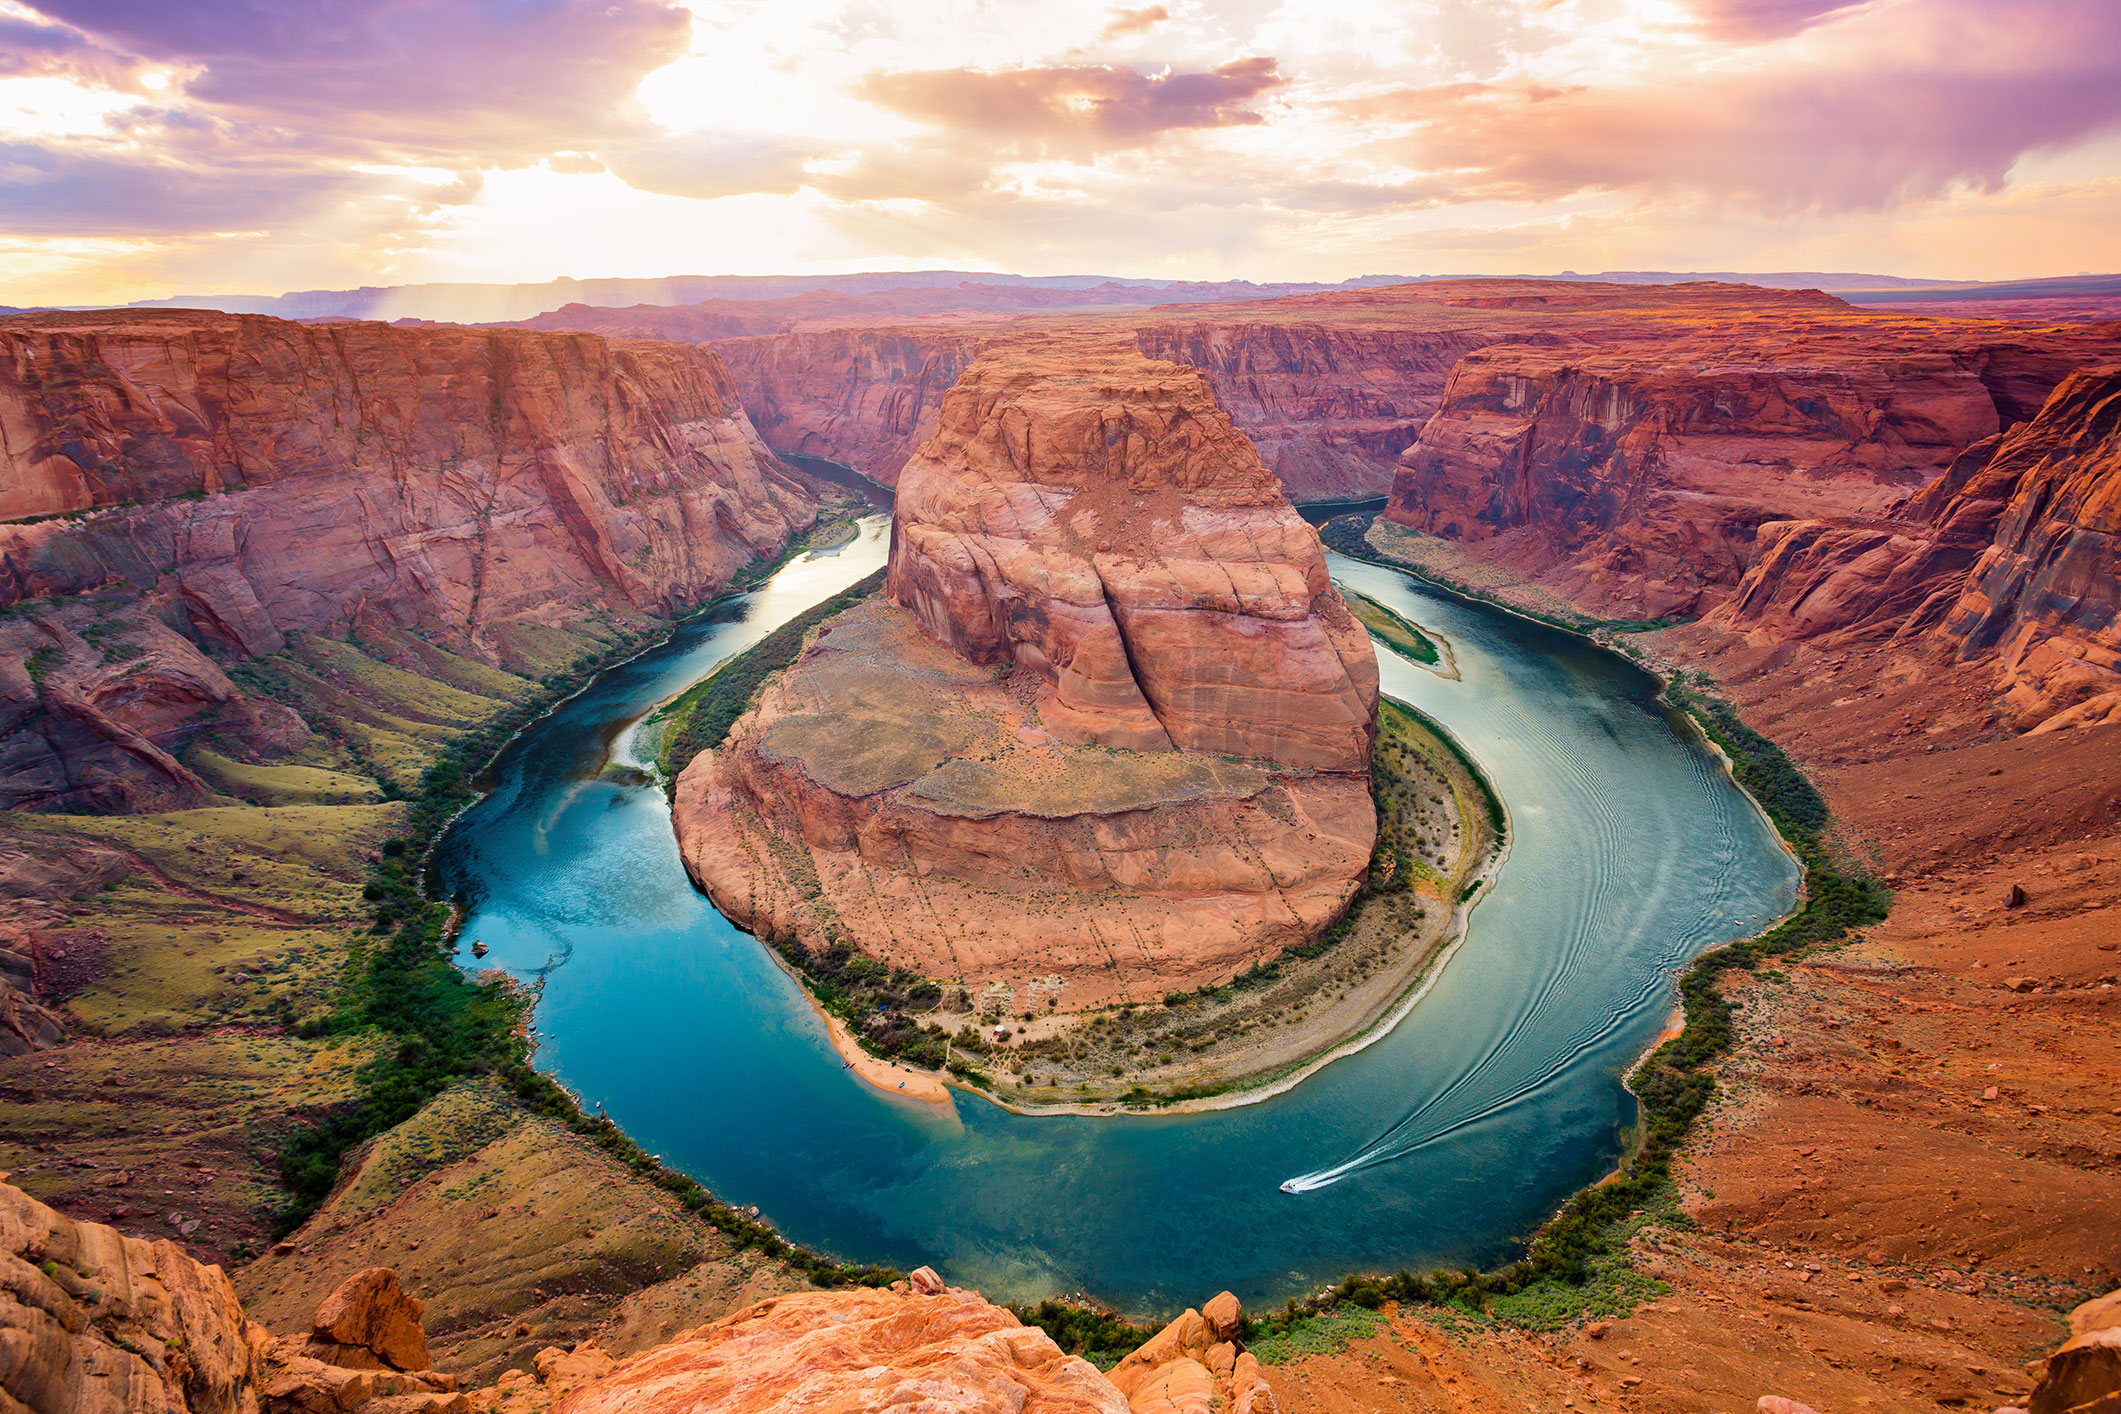 A river winds its way through a scenic canyon